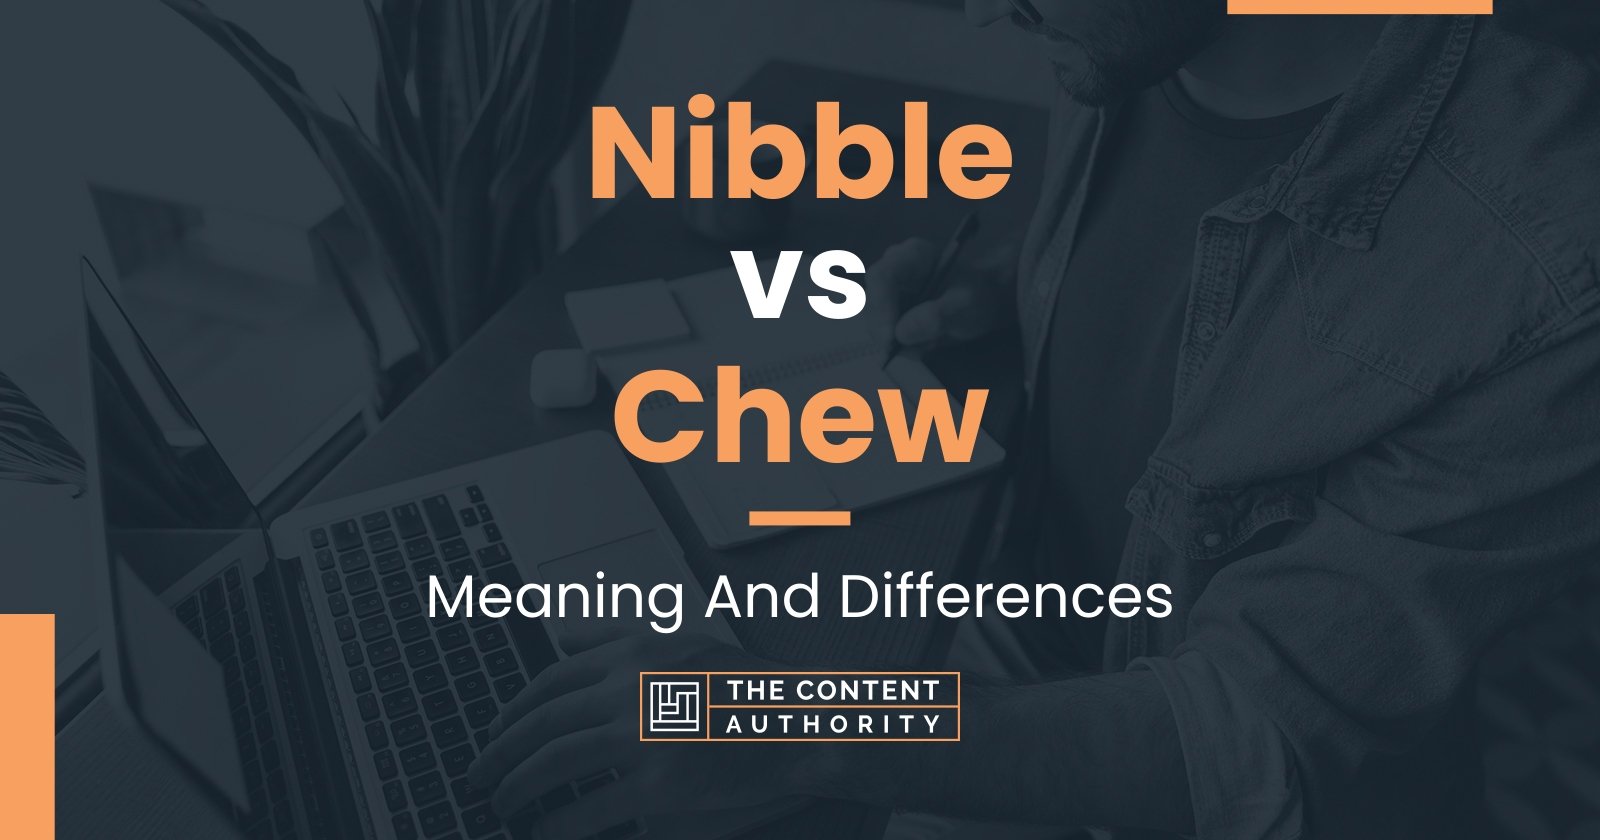 Nibble vs Chew: Meaning And Differences